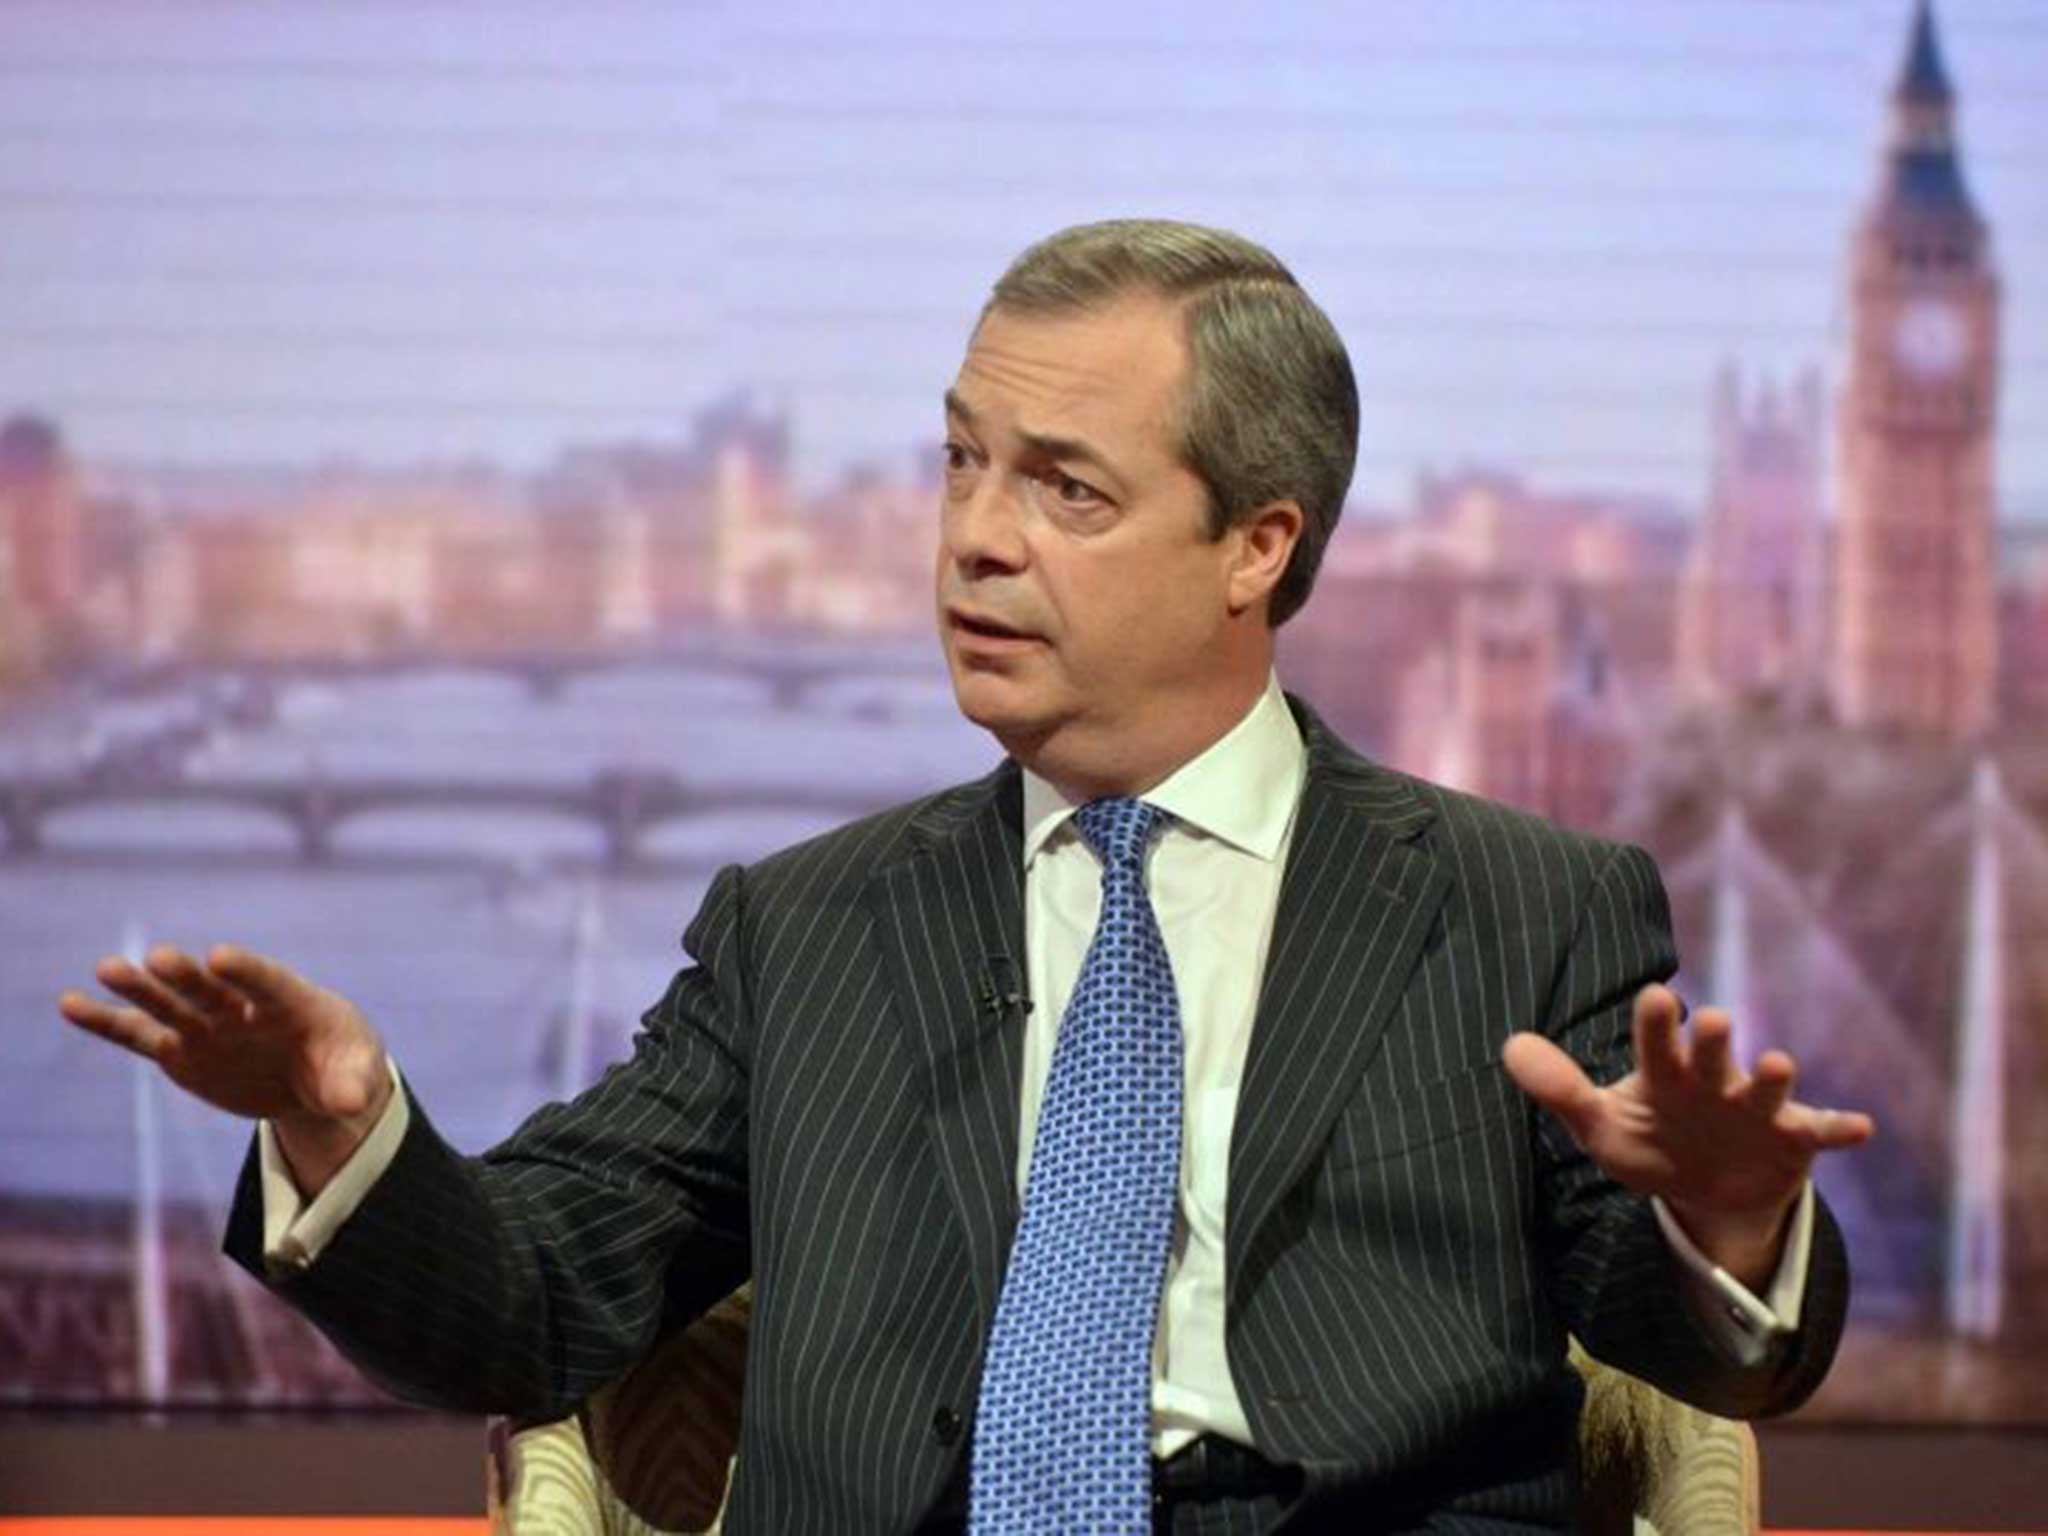 Farage claims the English need a bank holiday to celebrate St George